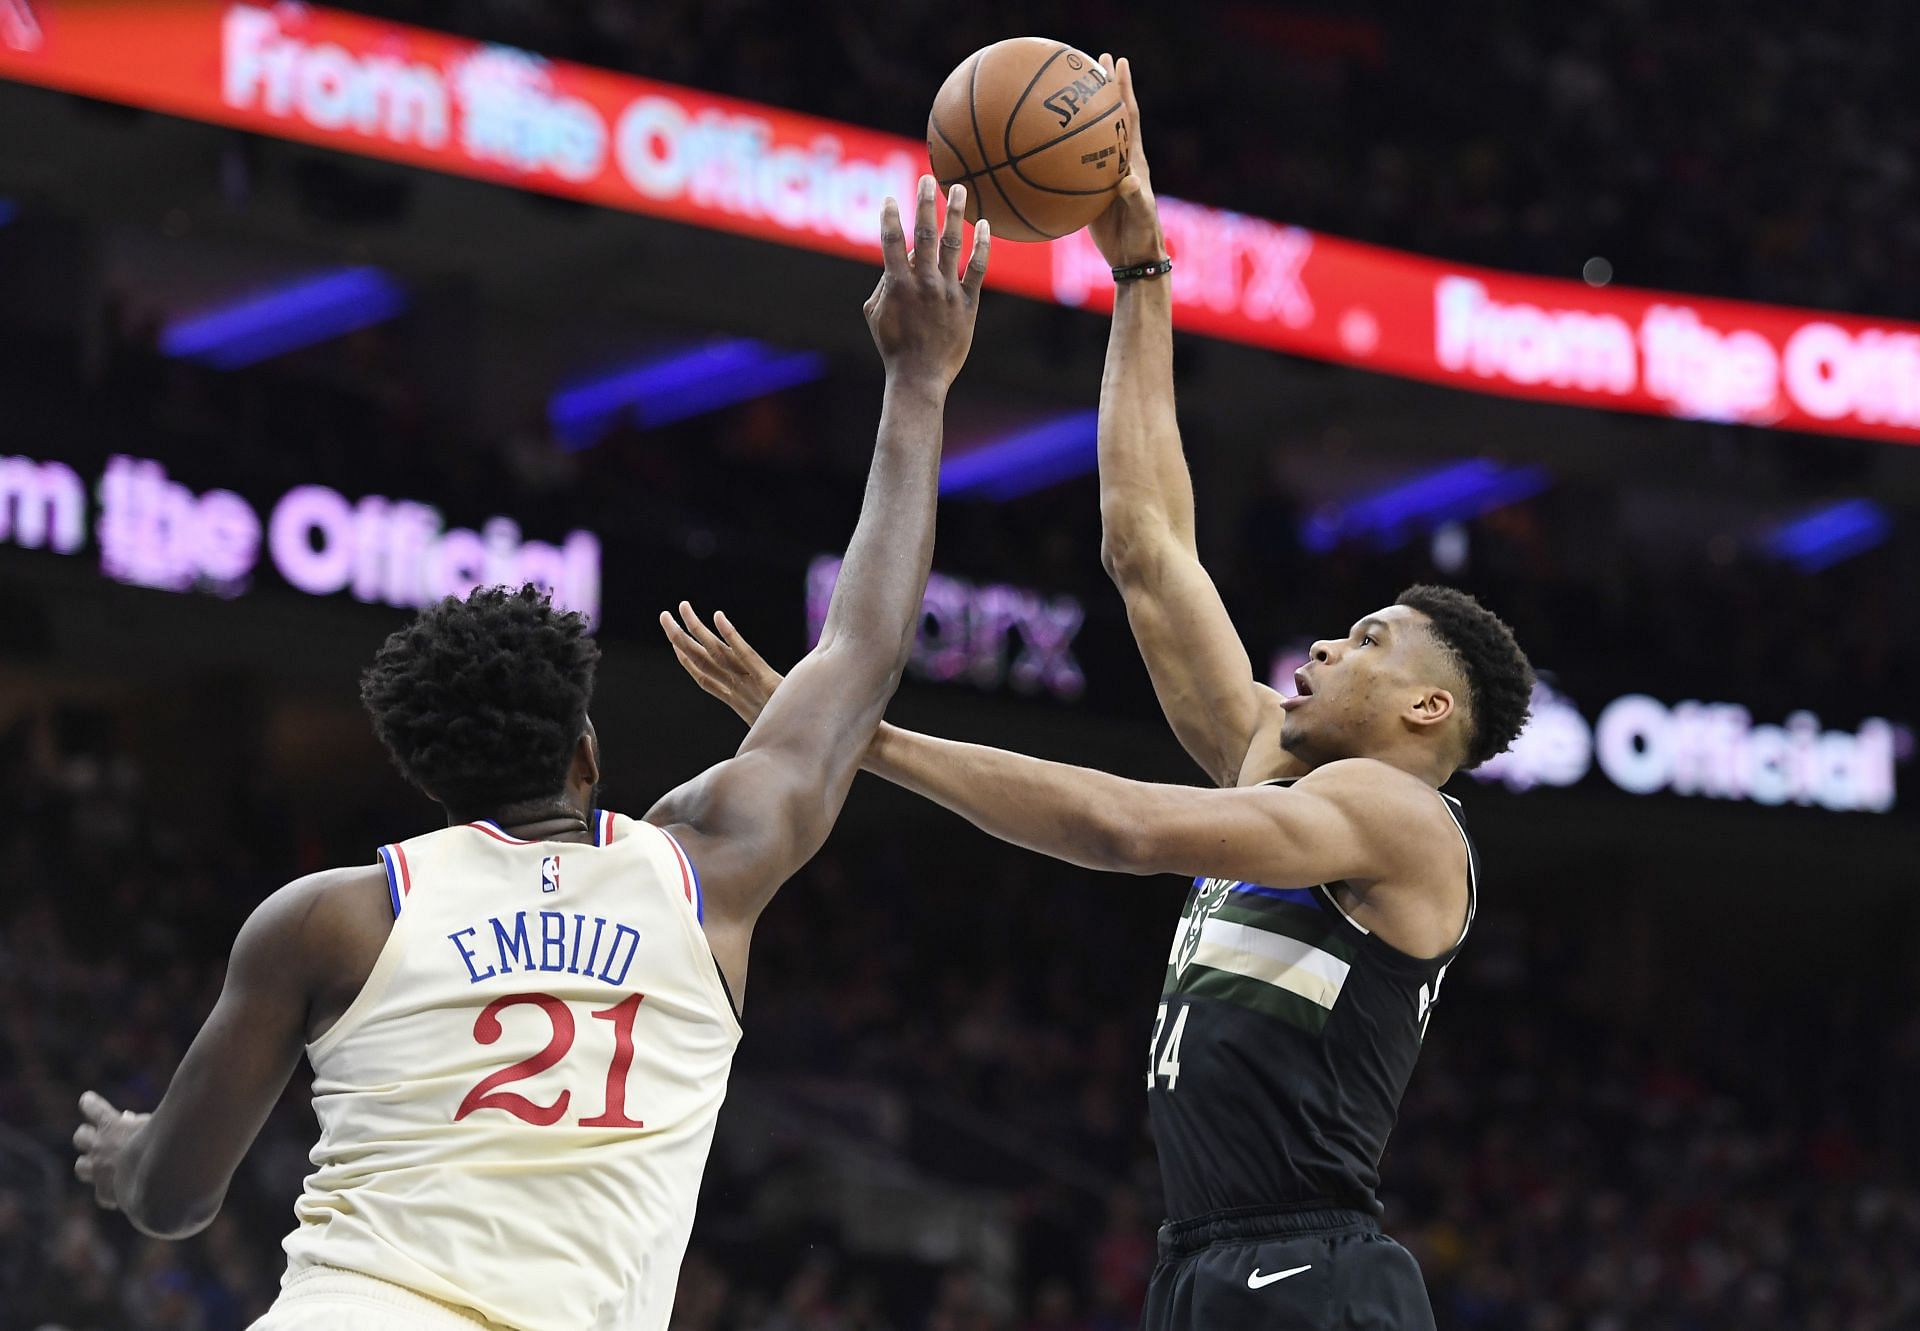 The Philadelphia 76ers will be without Joel Embiid as they host the defending champions Milwaukee Bucks on Tuesday.